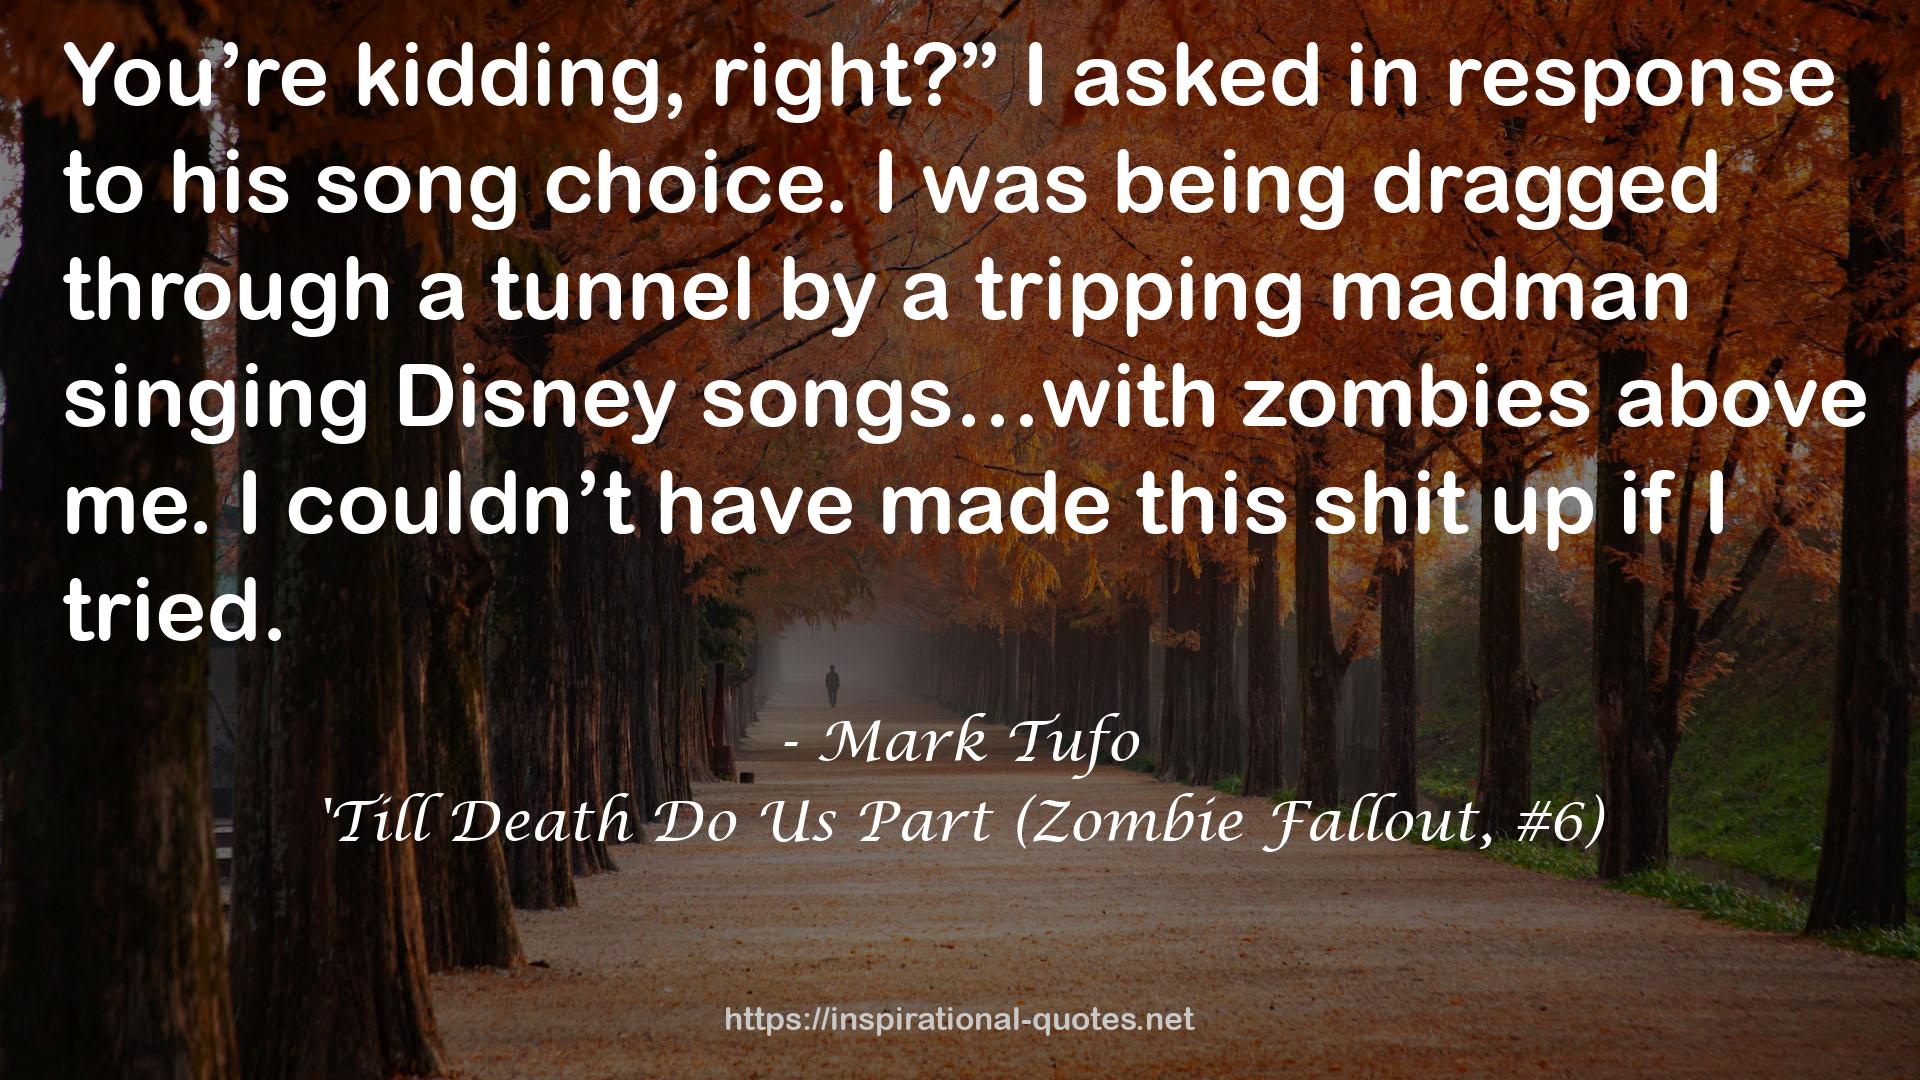 'Till Death Do Us Part (Zombie Fallout, #6) QUOTES